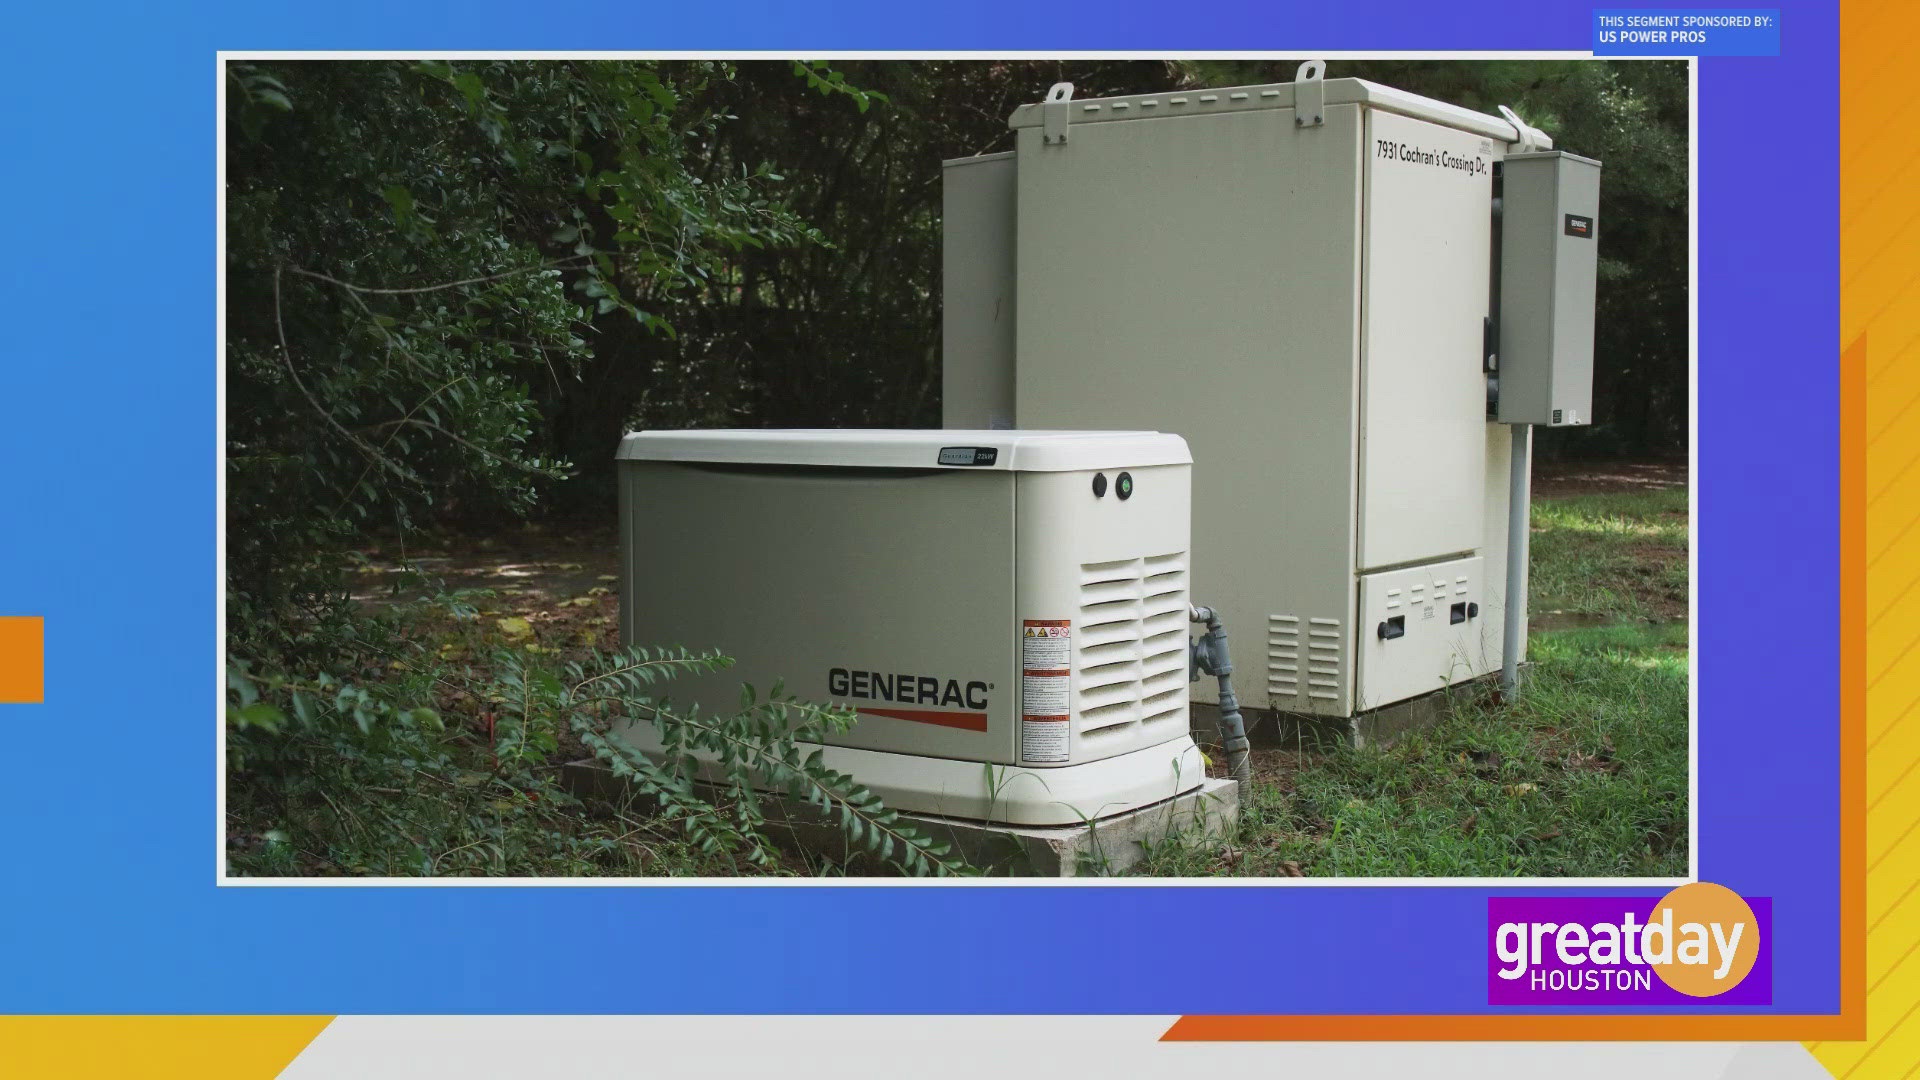 Veteran-owned and operated US Power Pros properly installs life-saving generators at a transparent and affordable price.